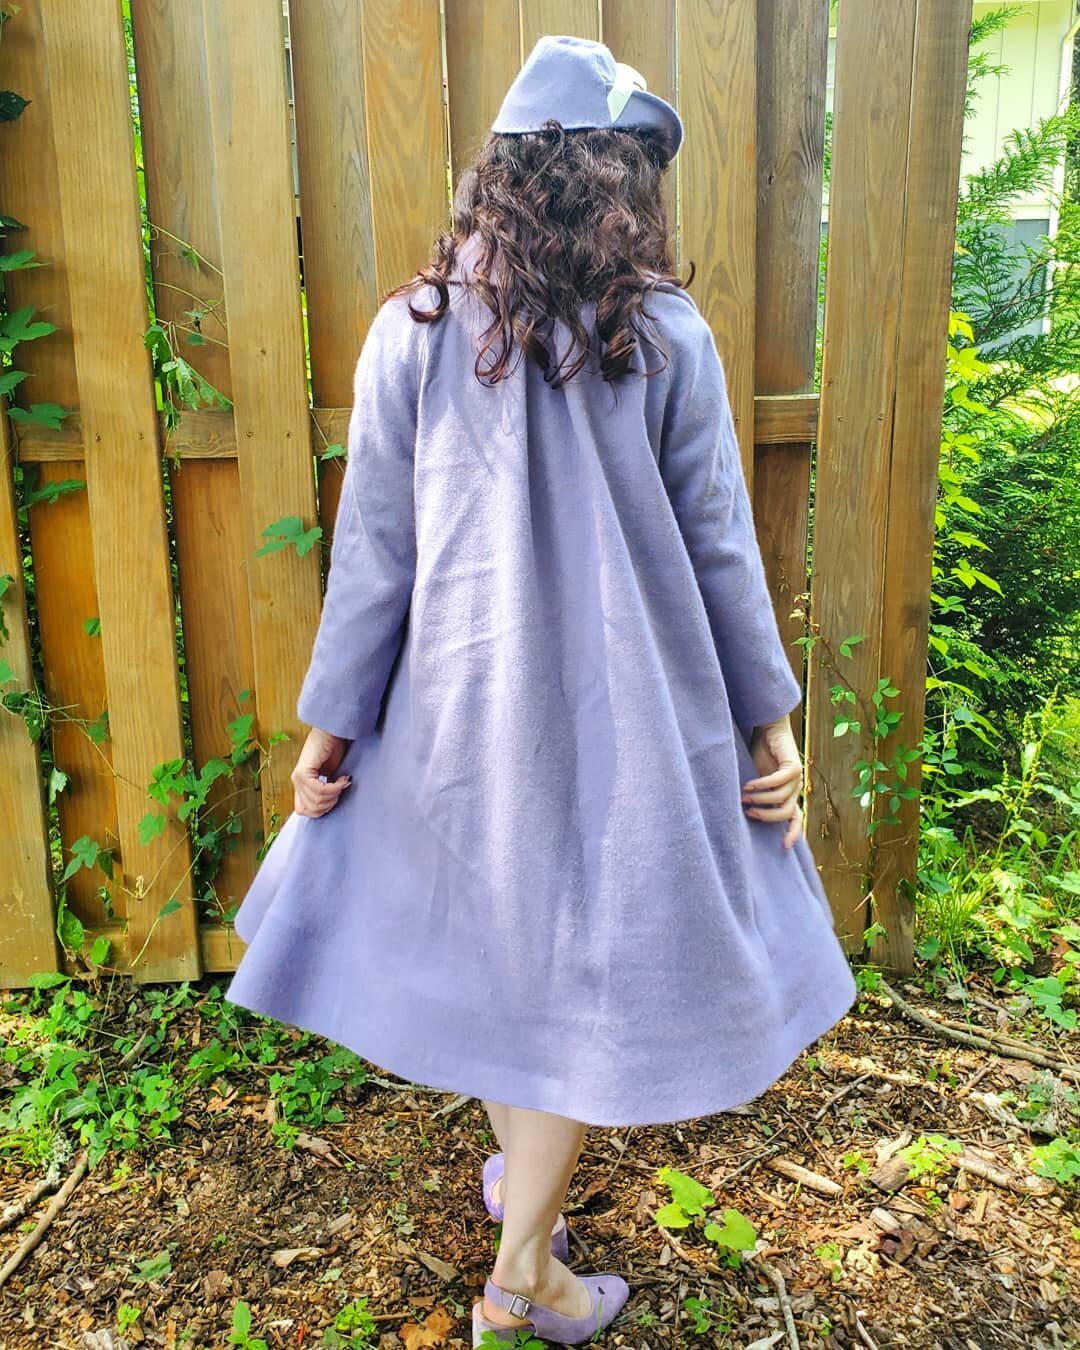 I made a wool coat in the middle of summer and meanwhile, I haven't done much summer sewing. Finding the motivation to spend time on it has been hard, thankful for friends like @minimaedelcreates who can encourage me by setting things like a deadline